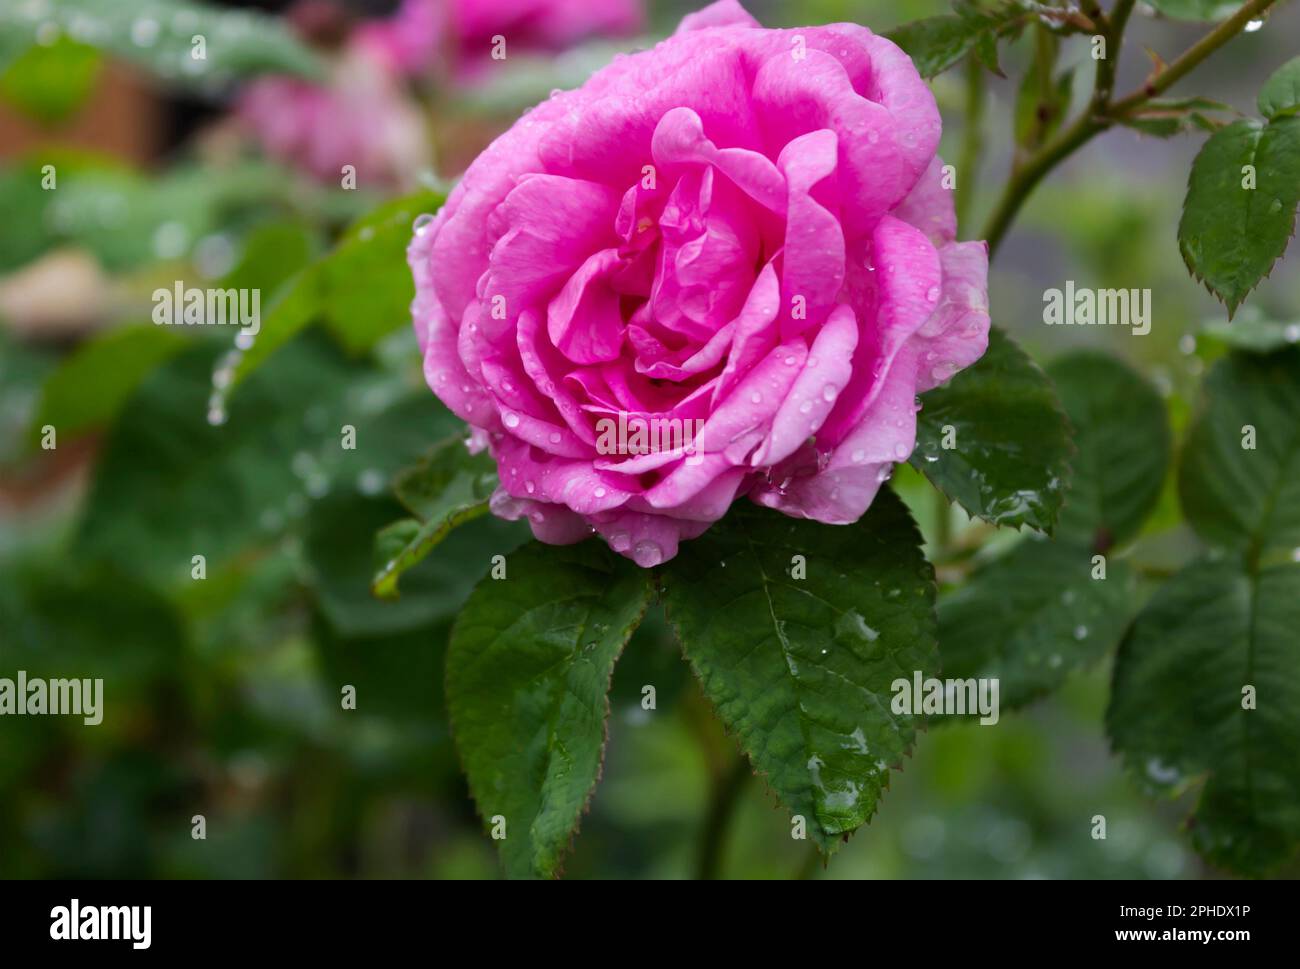 Close-up of a pink rose with dew drops on a natural green background. Stock Photo